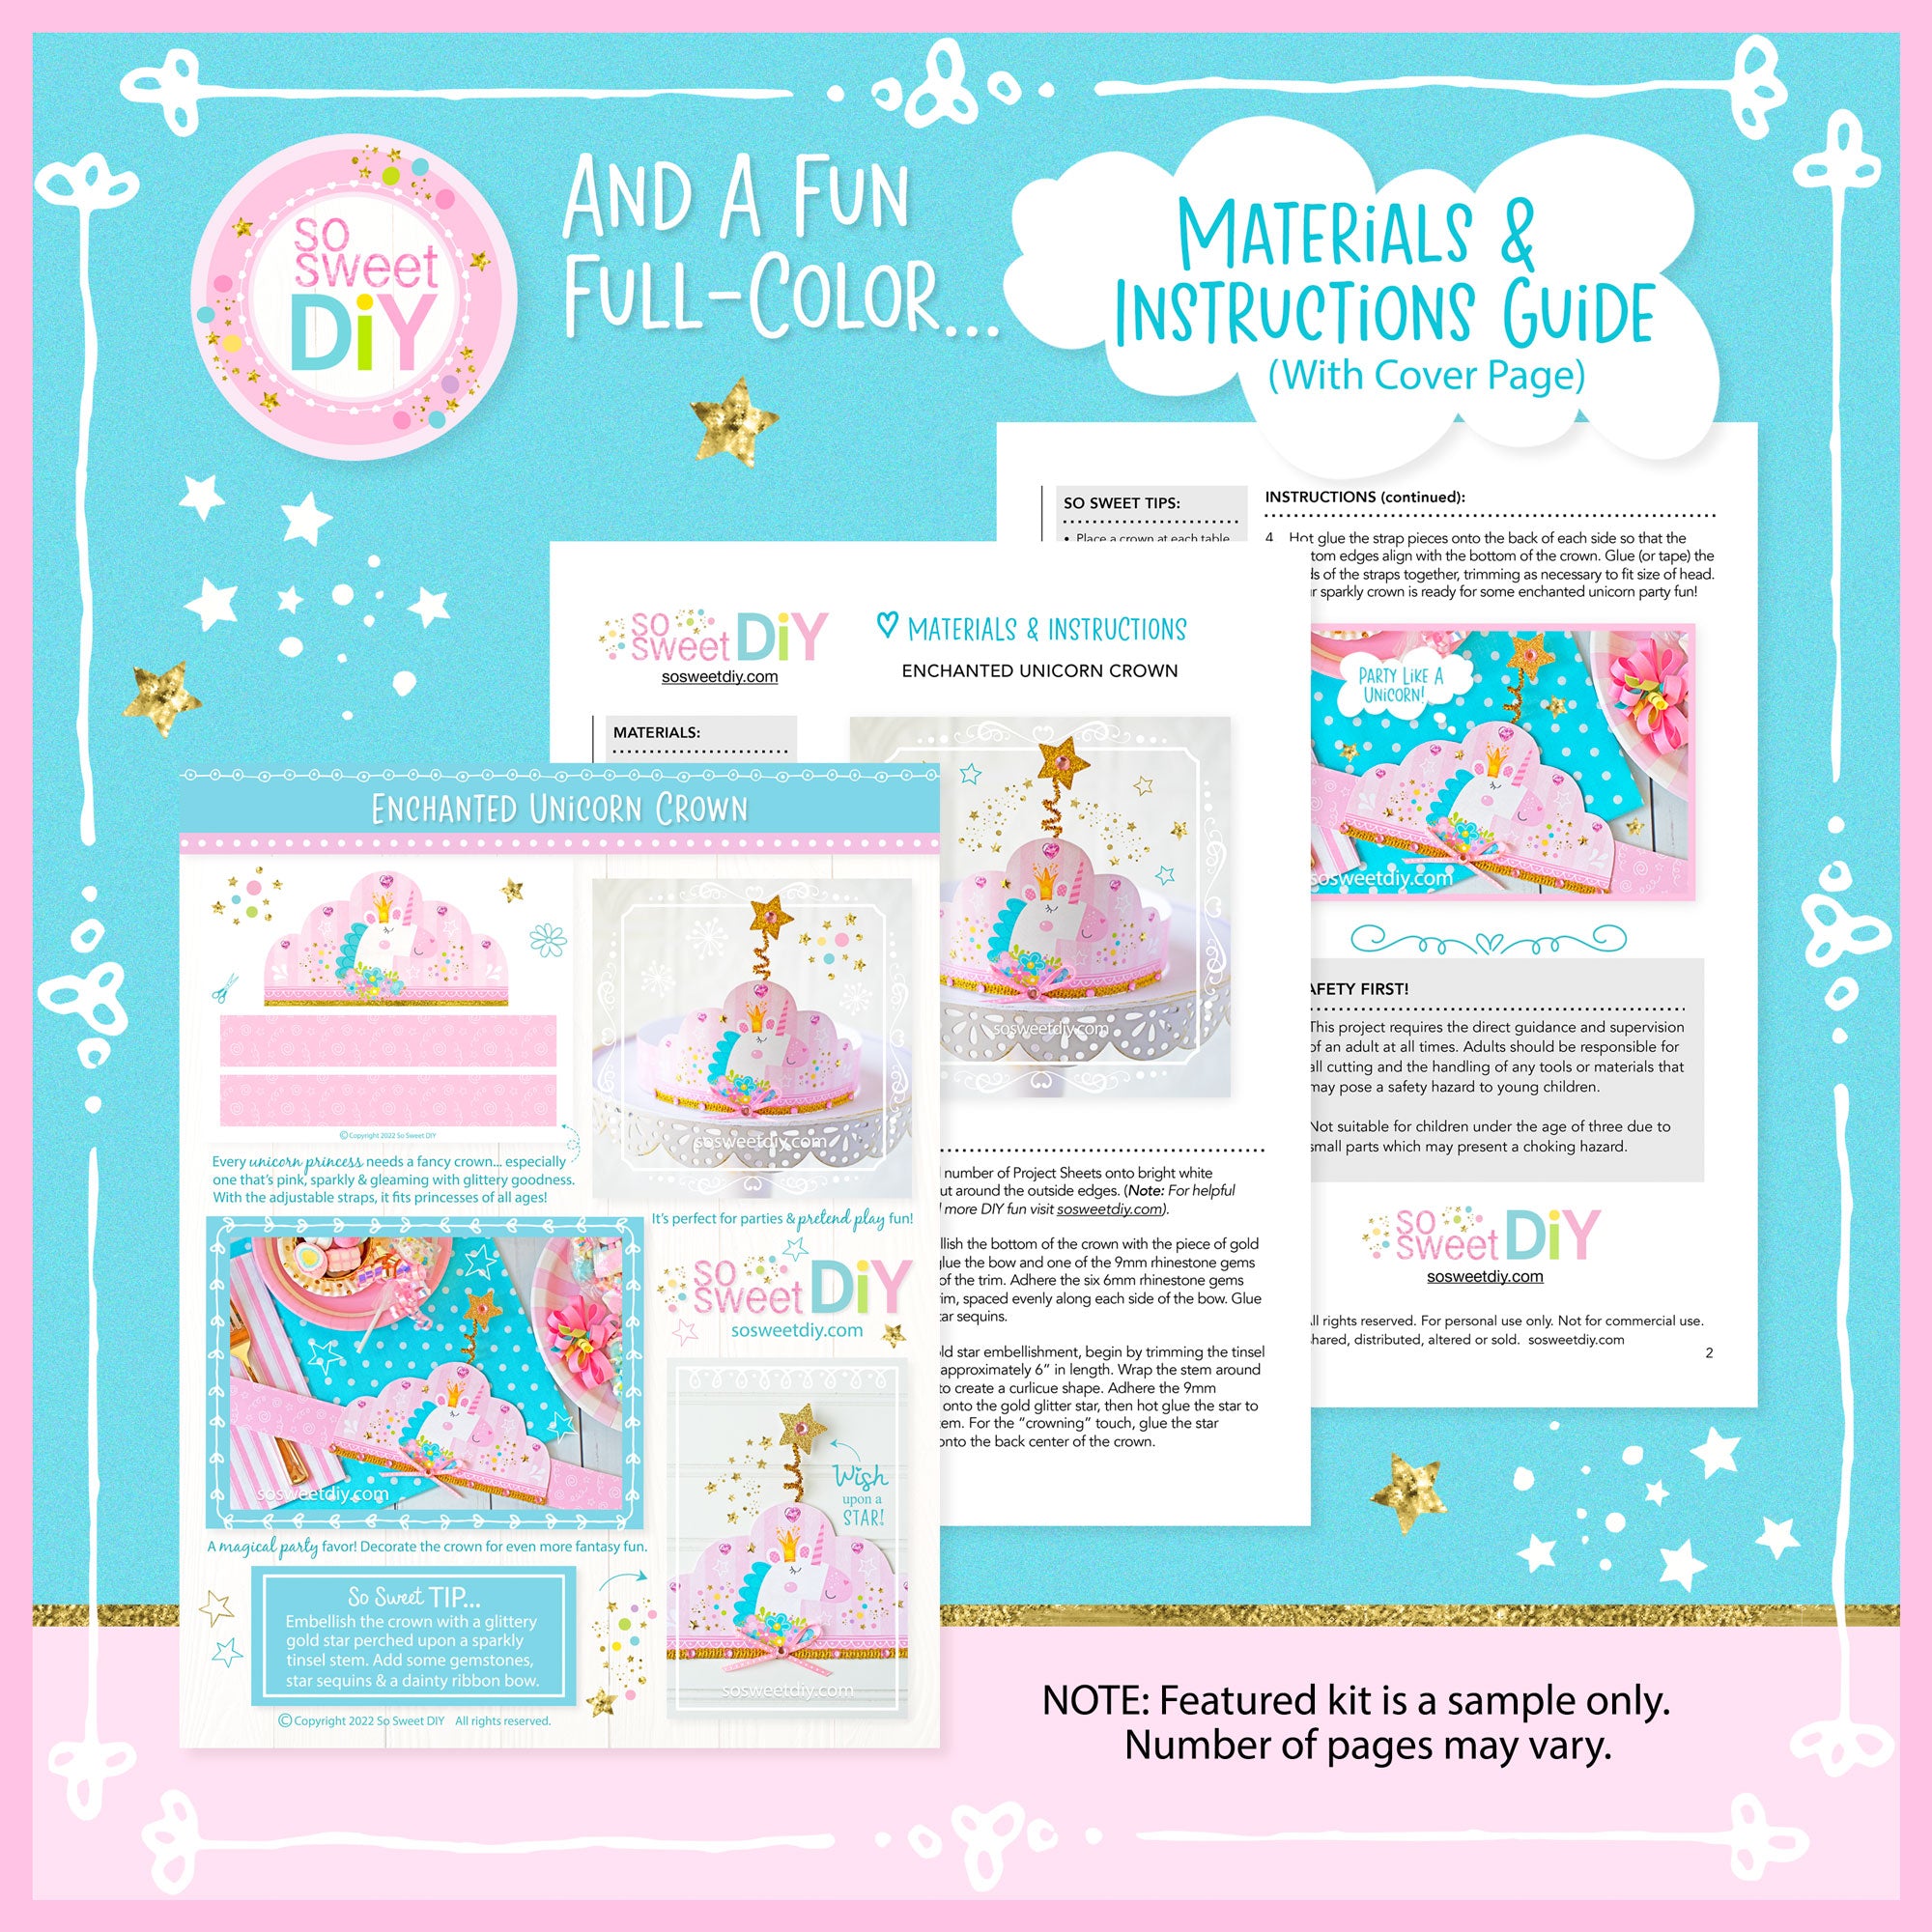 Adopt a Unicorn Party Kit / Certificate / Adoption Sign / Favor Tag / Craft  Activities, colouring sheet, unicorn names and unicorn crown